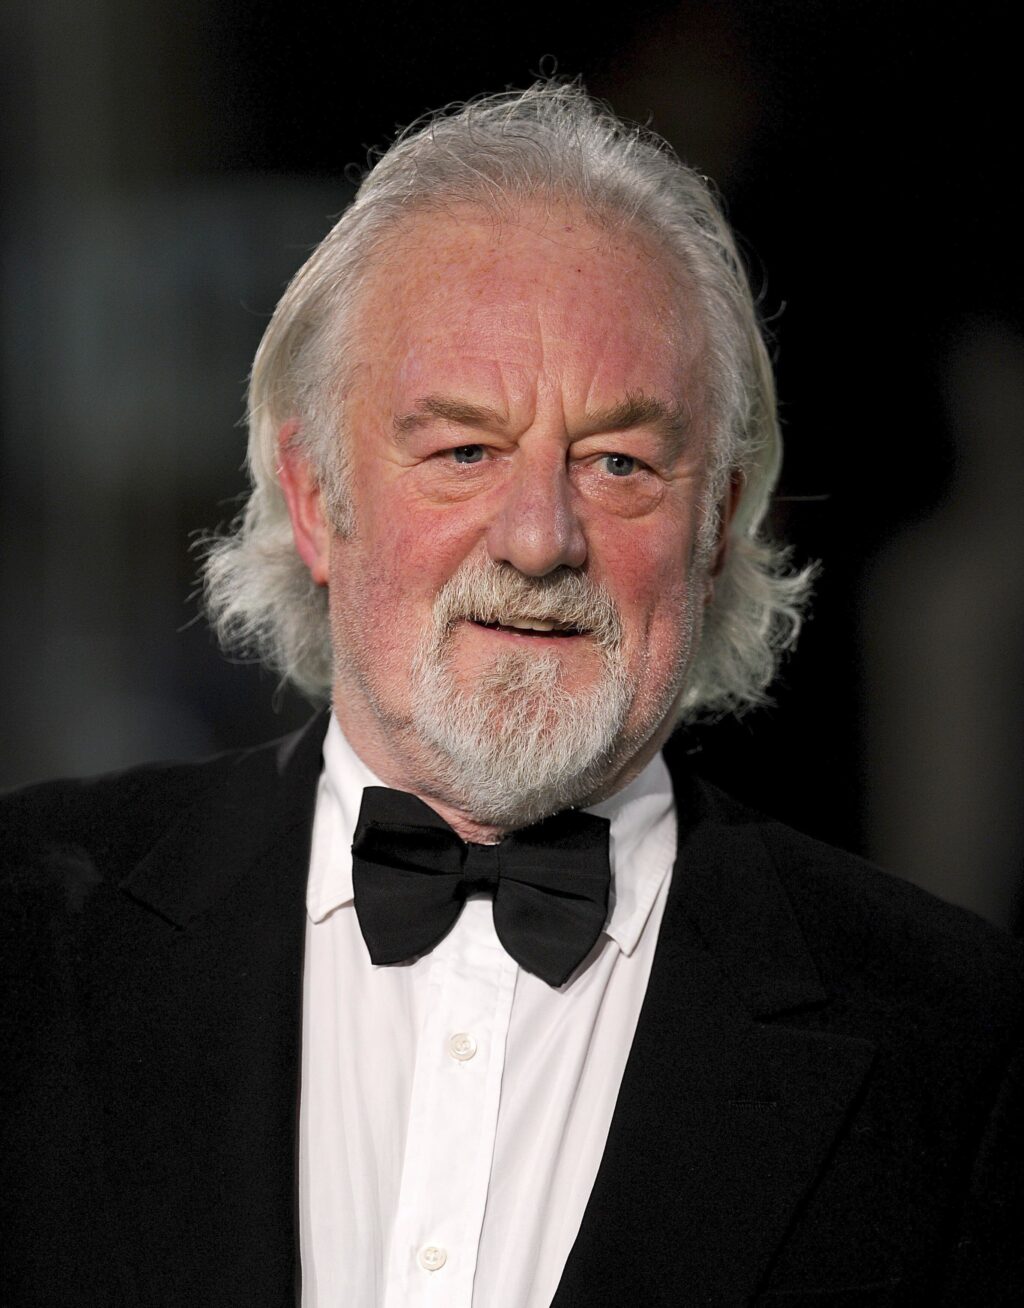 Actor Bernard Hill arrives for the U.K. Premiere of "The Hobbit: An Unexpected Journey," at the Odeon Leicester Square, in London, Dec. 12, 2012. Hill, who delivered a rousing battle cry before leading his people into battle in “The Lord of the Rings: The Return of the King" and went down with the ship as captain in “Titanic,” has died. (Dominic Lipinski/PA via AP)